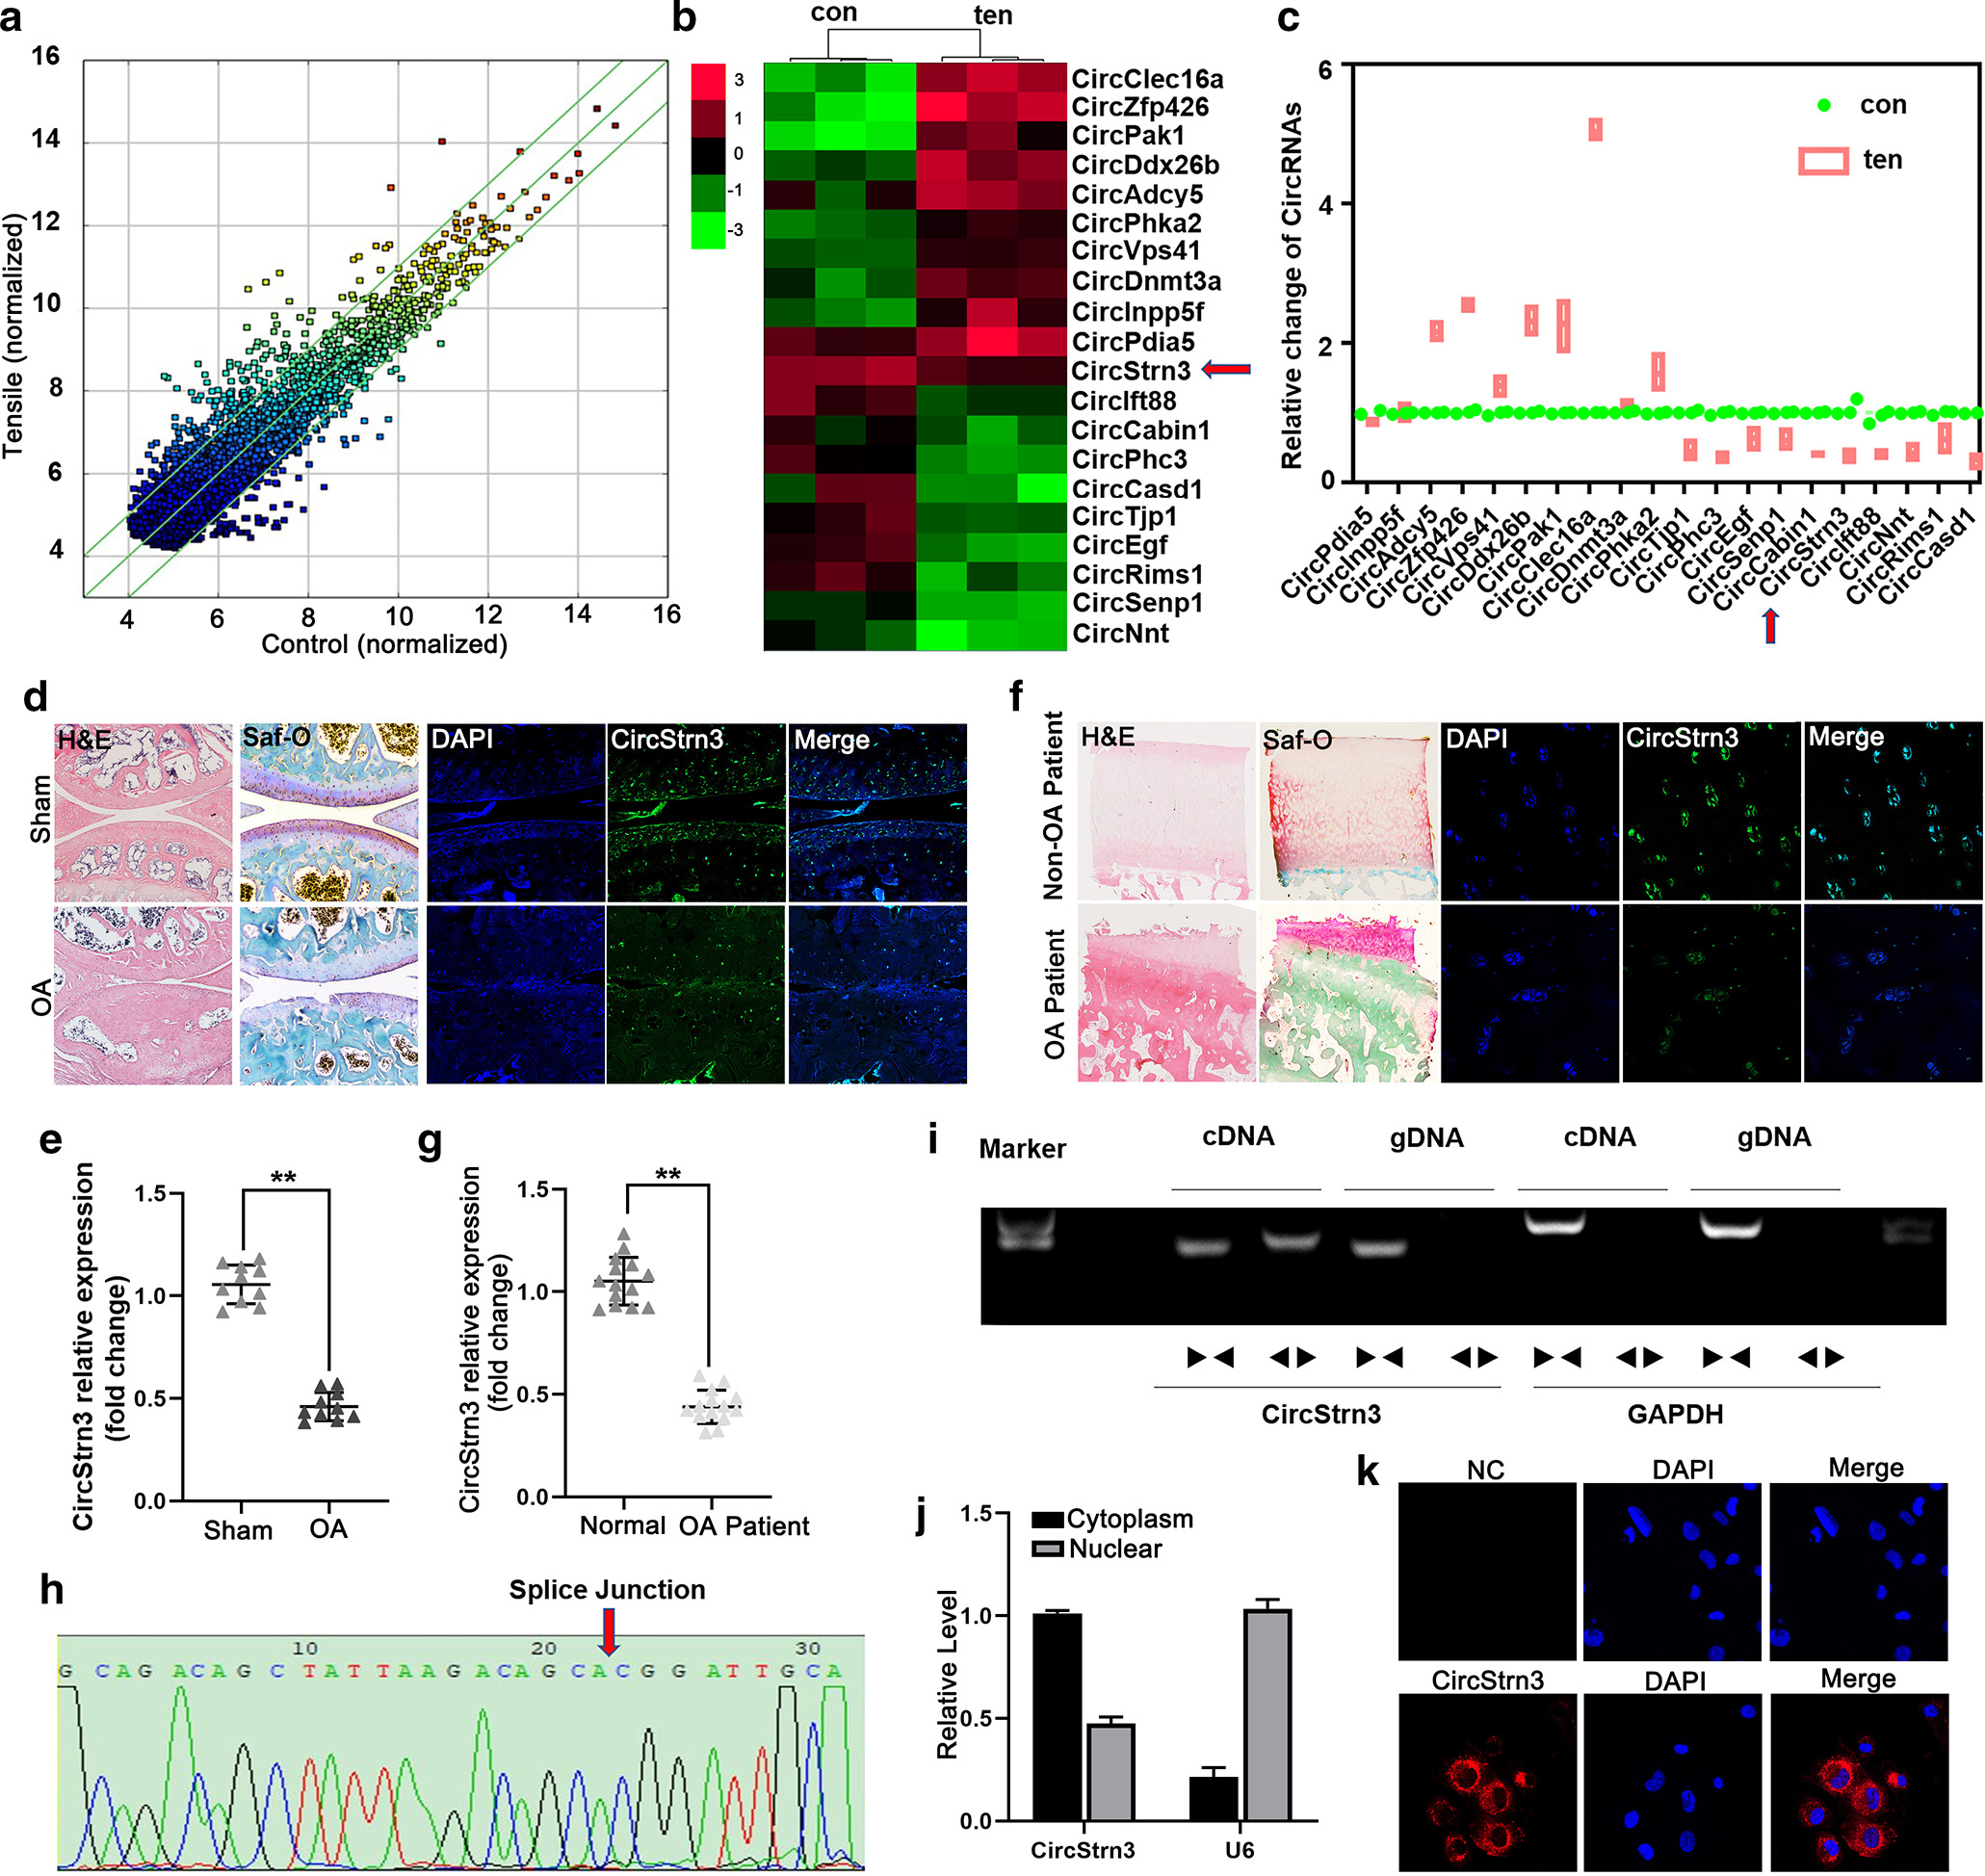 Fig. 1 
            
              CircStrn3 was decreased in knee articular cartilage from osteoarthritis (OA) patients and mice. a) Differentially expressed circular RNAs (circRNAs) found by ribo-minus RNA sequencing (RNA-seq). n = 3. b) Heat map representation of circRNAs differentially expressed in mechanically loaded chondrocytes. Red indicates circRNAs induced, and green indicates circRNAs repressed. (n = 3). c) RNA-seq results were validated by quantitative real-time polymerase chain reaction (qRT-PCR) in mechanically loaded chondrocytes. d) Haematoxylin and eosin (H&E) staining and Safranin-O (Saf-O)/Fast Green staining were applied to observe morphological structure of the articular cartilage in OA mice. Fluorescence in situ hybridization (FISH) staining results showed that circStrn3 was downregulated in OA mice cartilage. (n = 4, scale bar: 10 μm). e) The results of qRT-PCR show that expression of circStrn3 was decreased in chondrocytes from OA mice. (n = 4, **p < 0.01). f) H&E staining and Safranin-O/Fast Green staining were applied to observe morphological structure of the articular cartilage in OA patients. FISH staining results showed that circStrn3 was downregulated in OA patients. (n = 6, scale bar: 10 μm). g) The results of qRT-PCR showed that expression of circStrn3 was decreased in chondrocytes from OA patients. (n = 6, **p < 0.01). h) Divergent primers detected circular RNAs in complementary DNA (cDNA), but not in genomic DNA (gDNA). i) Sanger sequencing showed the back-splice junction (arrow) of circStrn3. j) CircStrn3 expression was measured in nuclear and cytoplasmic separation by qRT-PCR in chondrocytes. (n = 4, **p < 0.01). k) FISH staining results show that circStrn3 was downregulated in mechanically loaded chondrocytes (n = 4, scale bar: 10 μm). Independent-samples t-test was used to compare data between two groups, and one-way analysis of variance was used for comparison between multiple groups. con, control group; DAPI, 4′,6-diamidino-2-phenylindole; GAPDH, glyceraldehyde 3-phosphate dehydrogenase; NC, negative control; ten, mechanically loaded chondrocytes group.
          